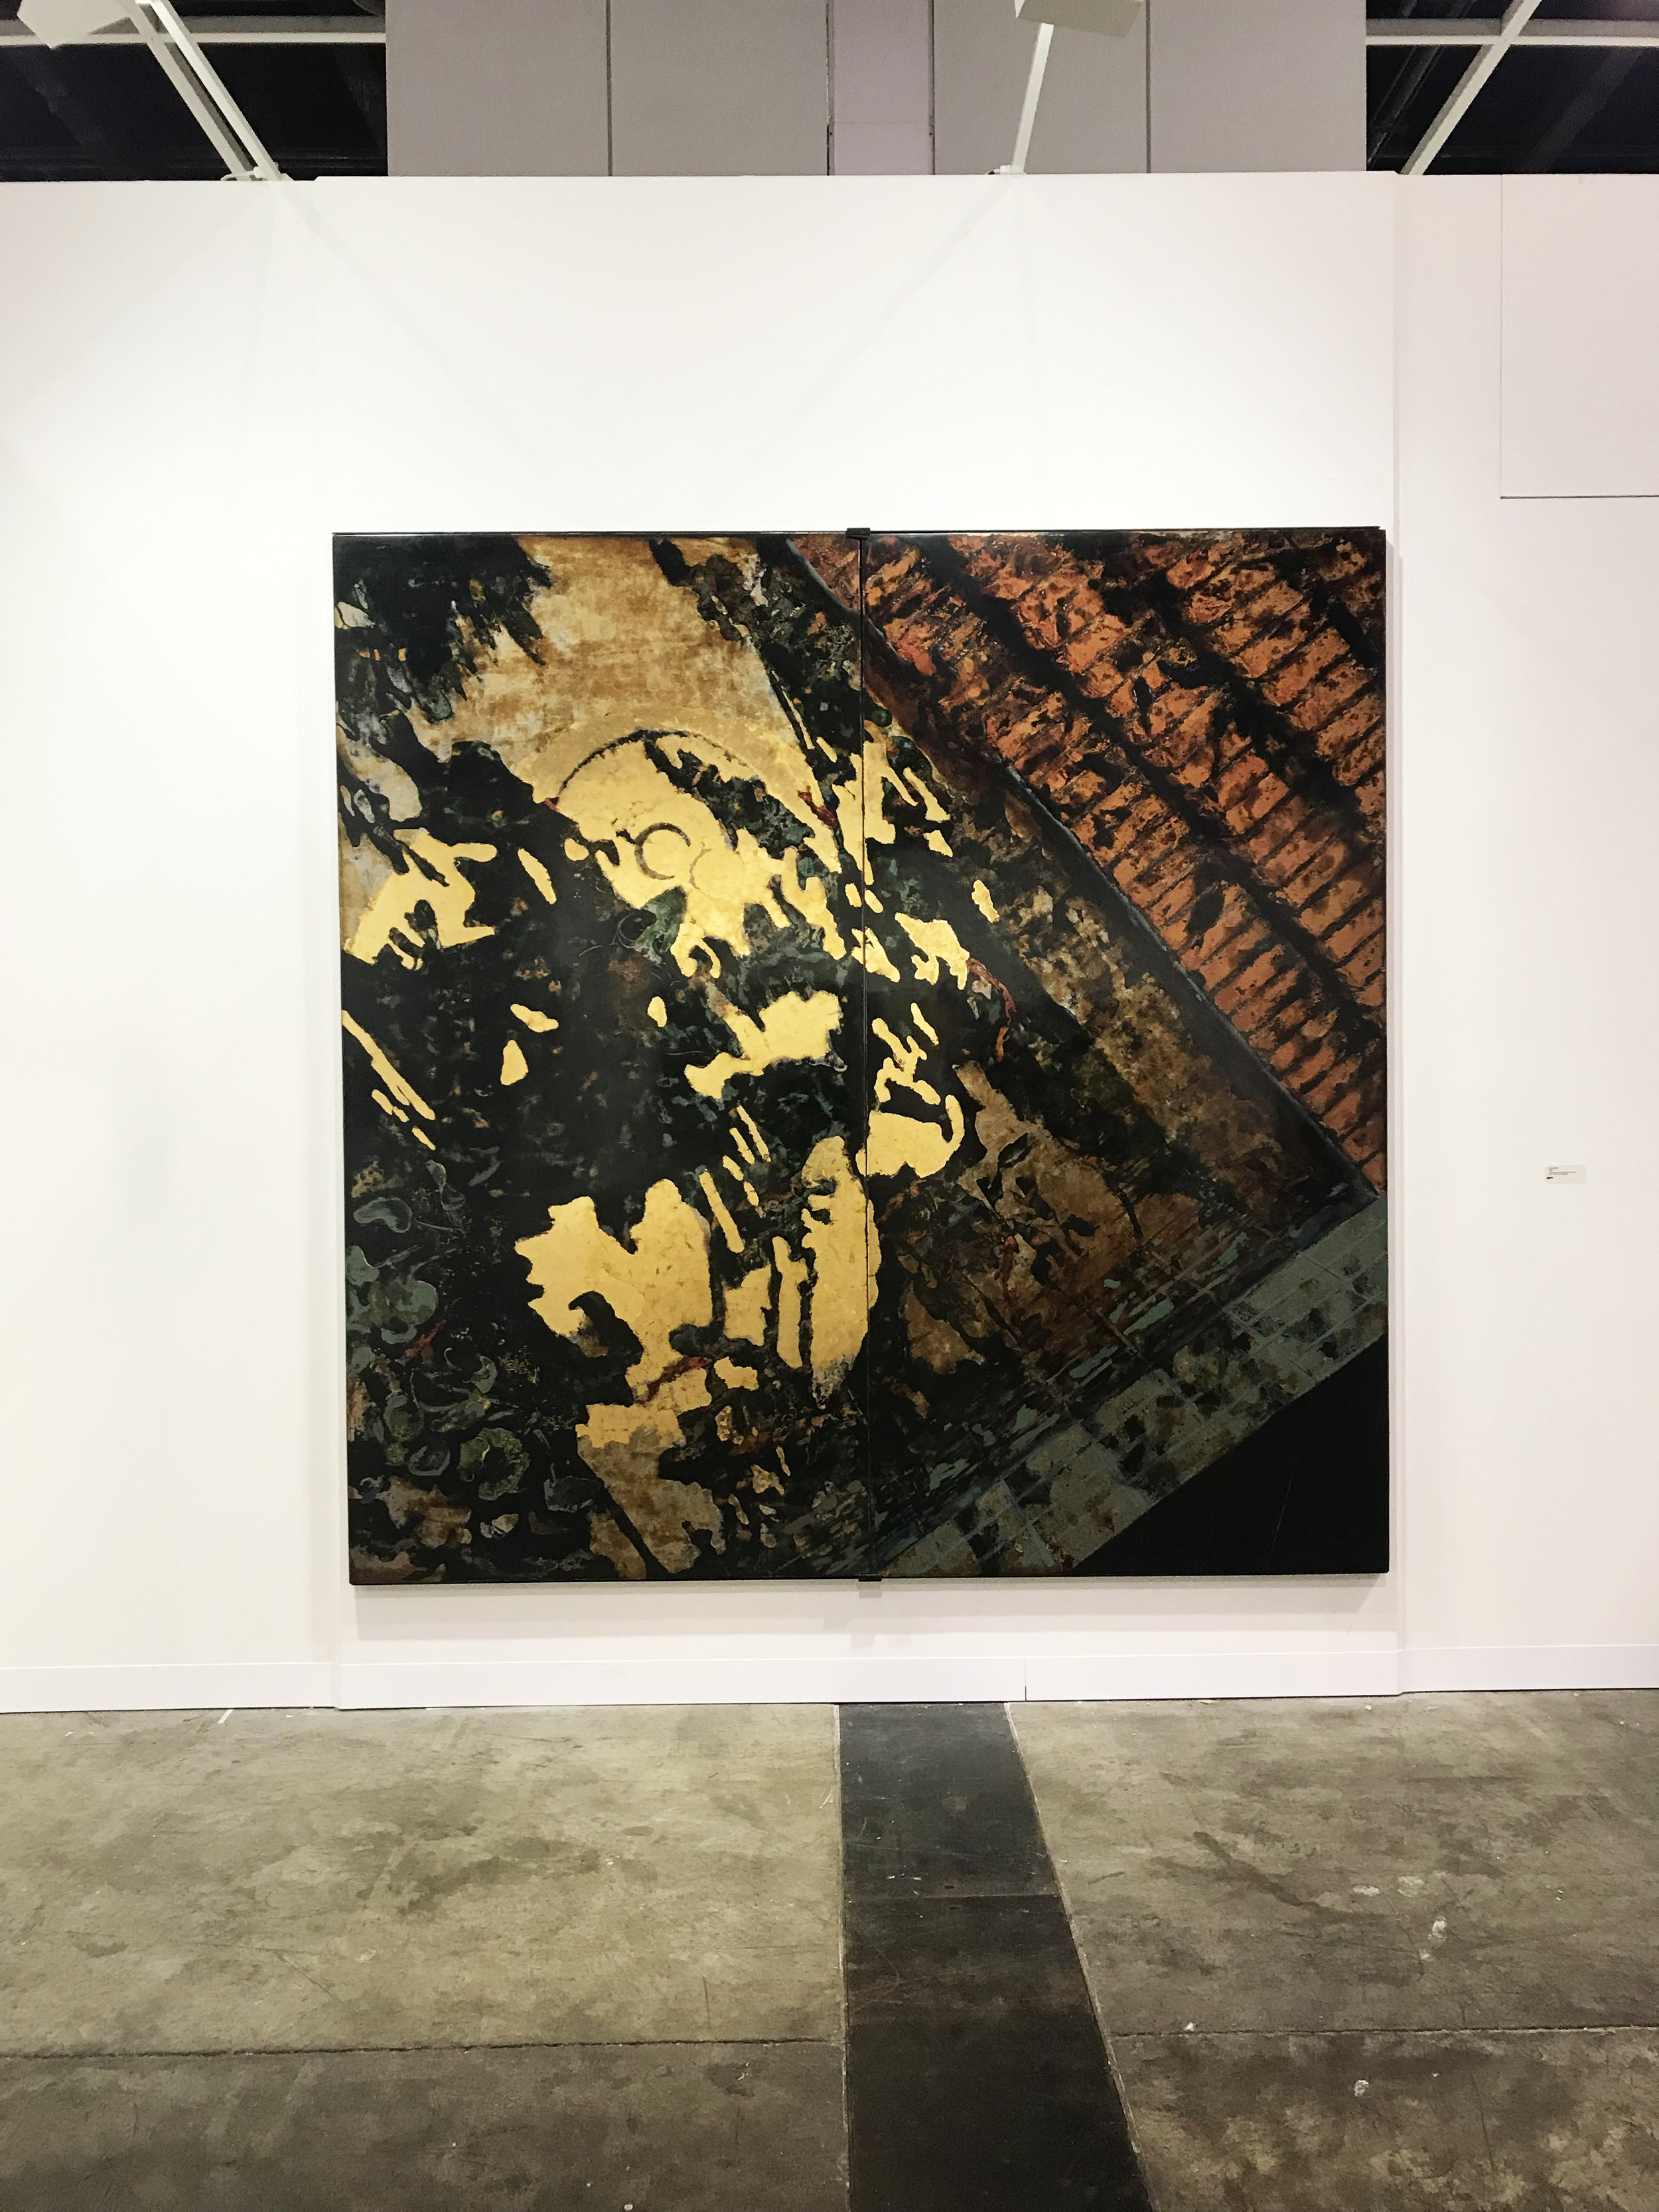  Phi Phi OANH  Lacuna (Di Sotto in Su)  2019 S ơn   ta  (Vietnamese natural lacquer) with gold, silver leaf, aluminium metals and stone pigments on wood  H240 x W240 x D4 cm (diptych) 